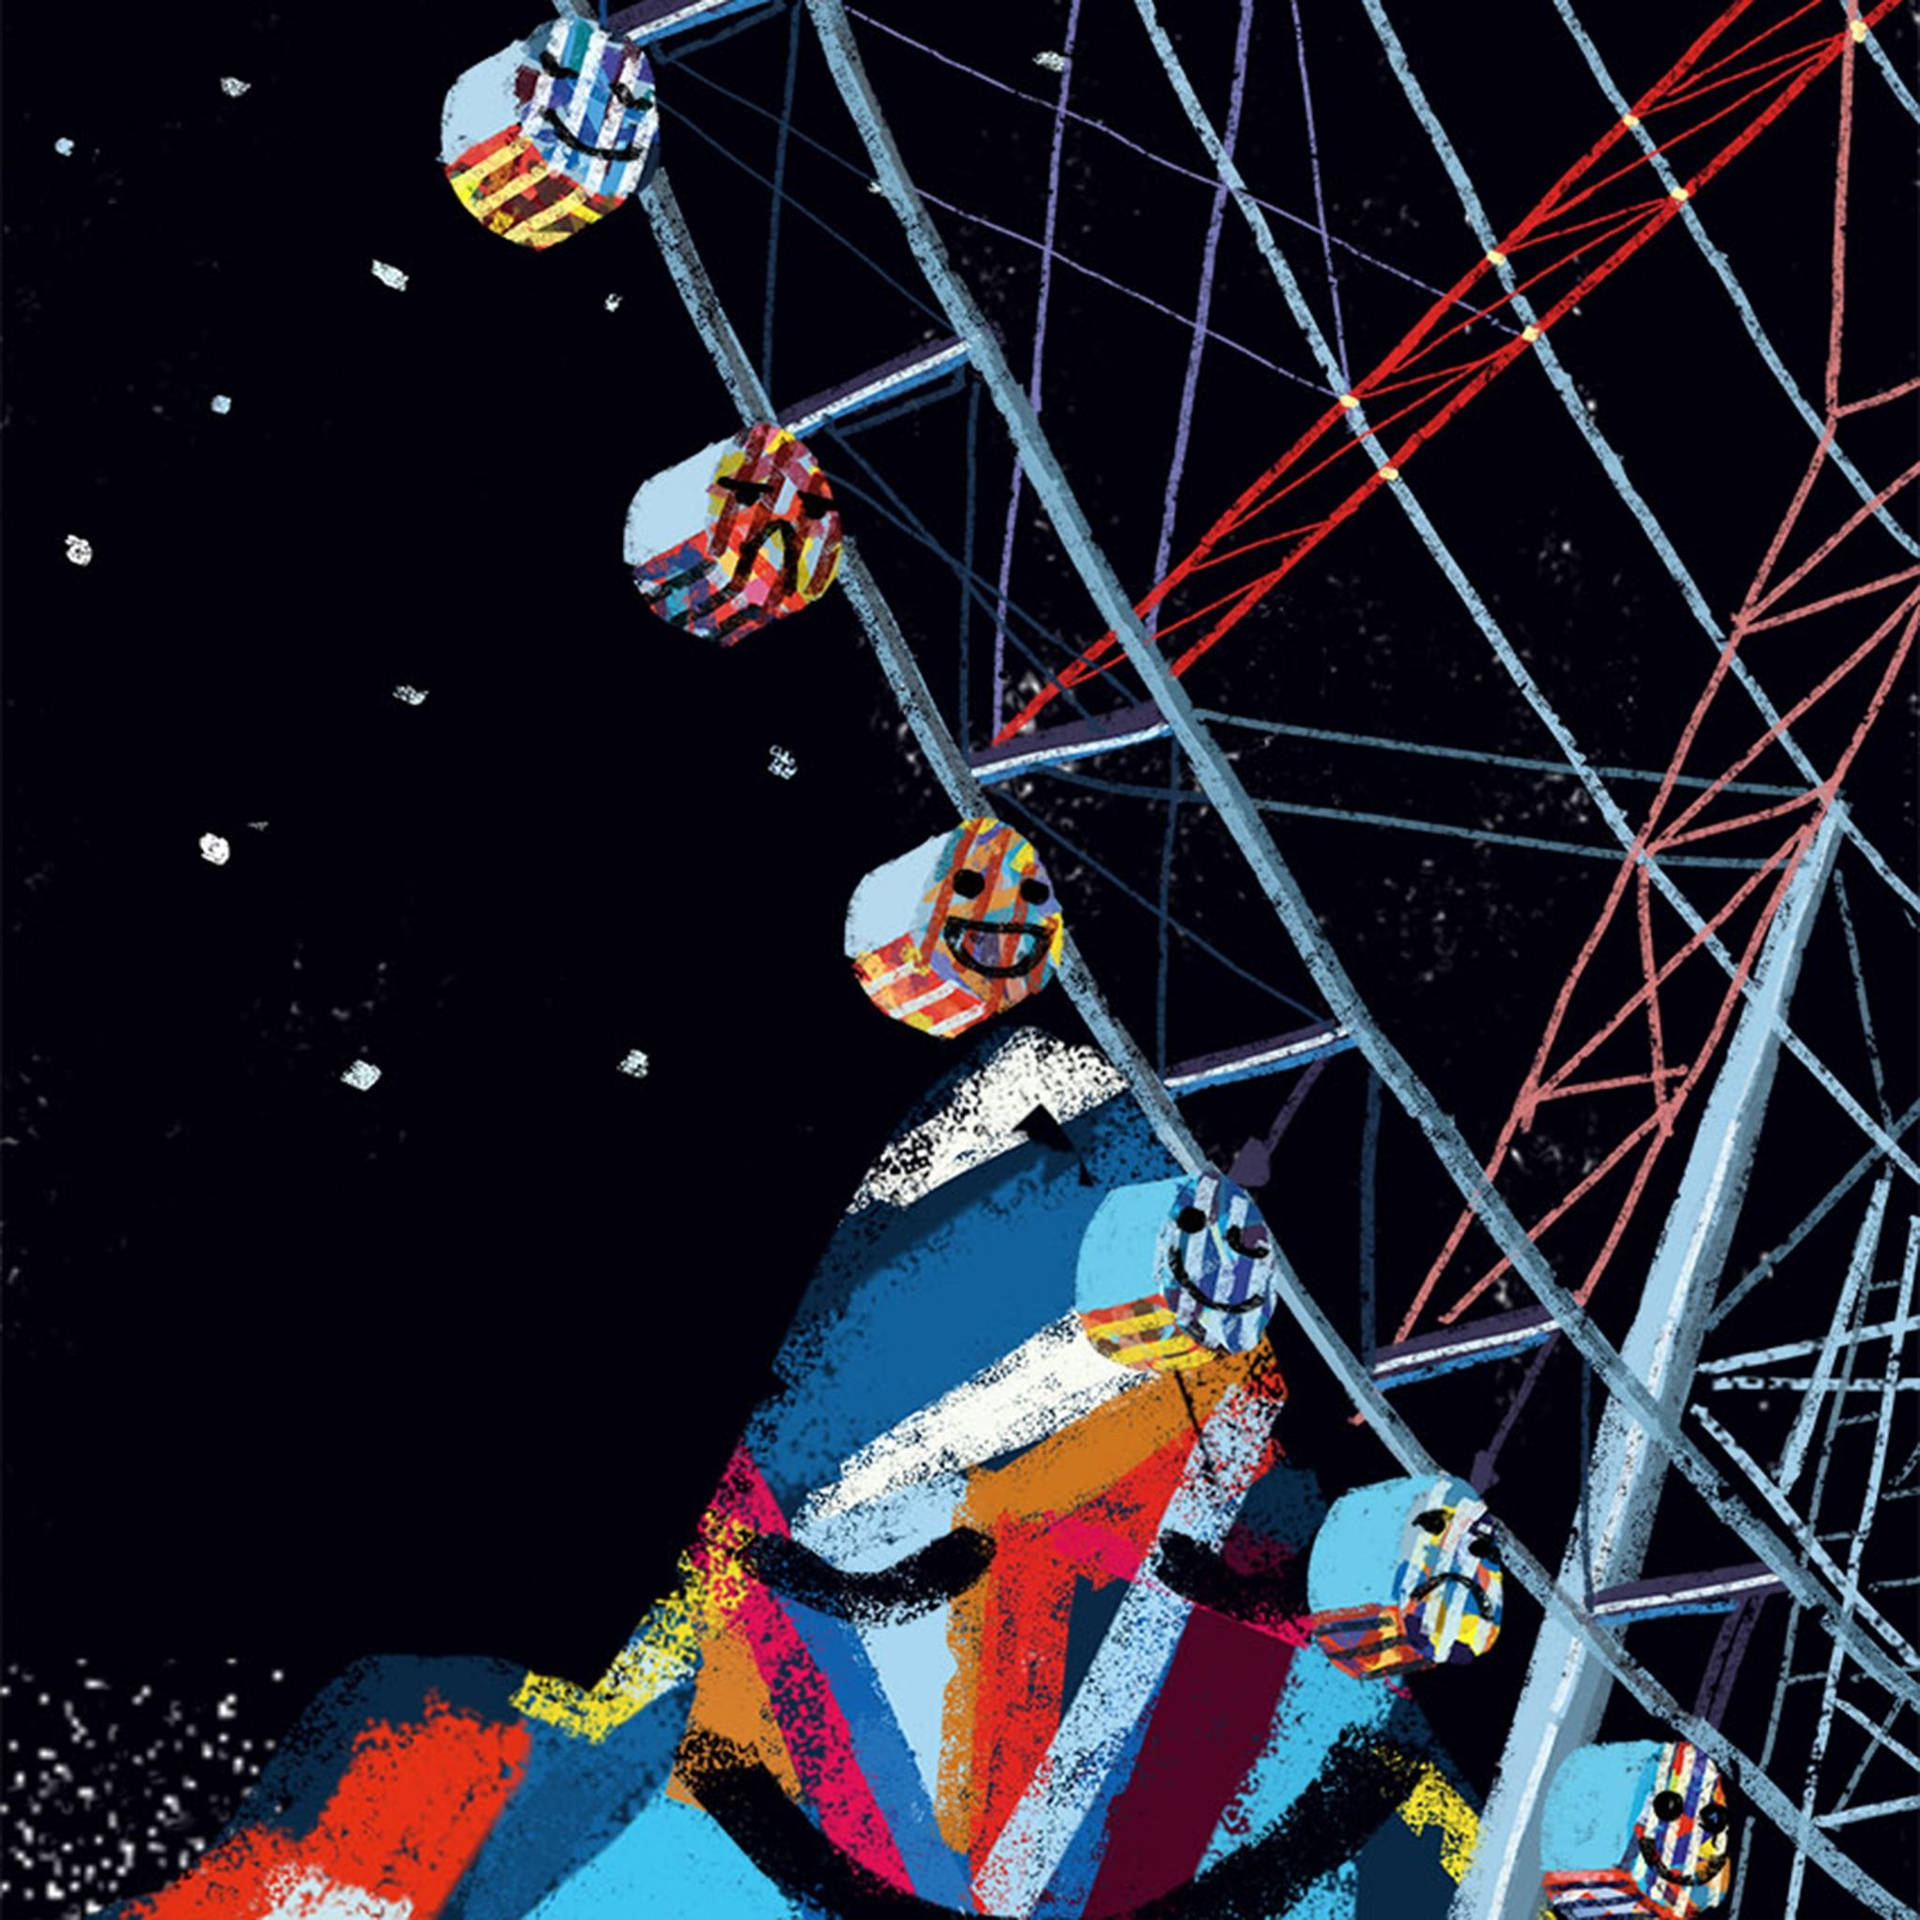 A Modern Take On Classic Experiences - This Ferris Wheel Art Is A Reminder Of The Beauty Of Simpler Times Background